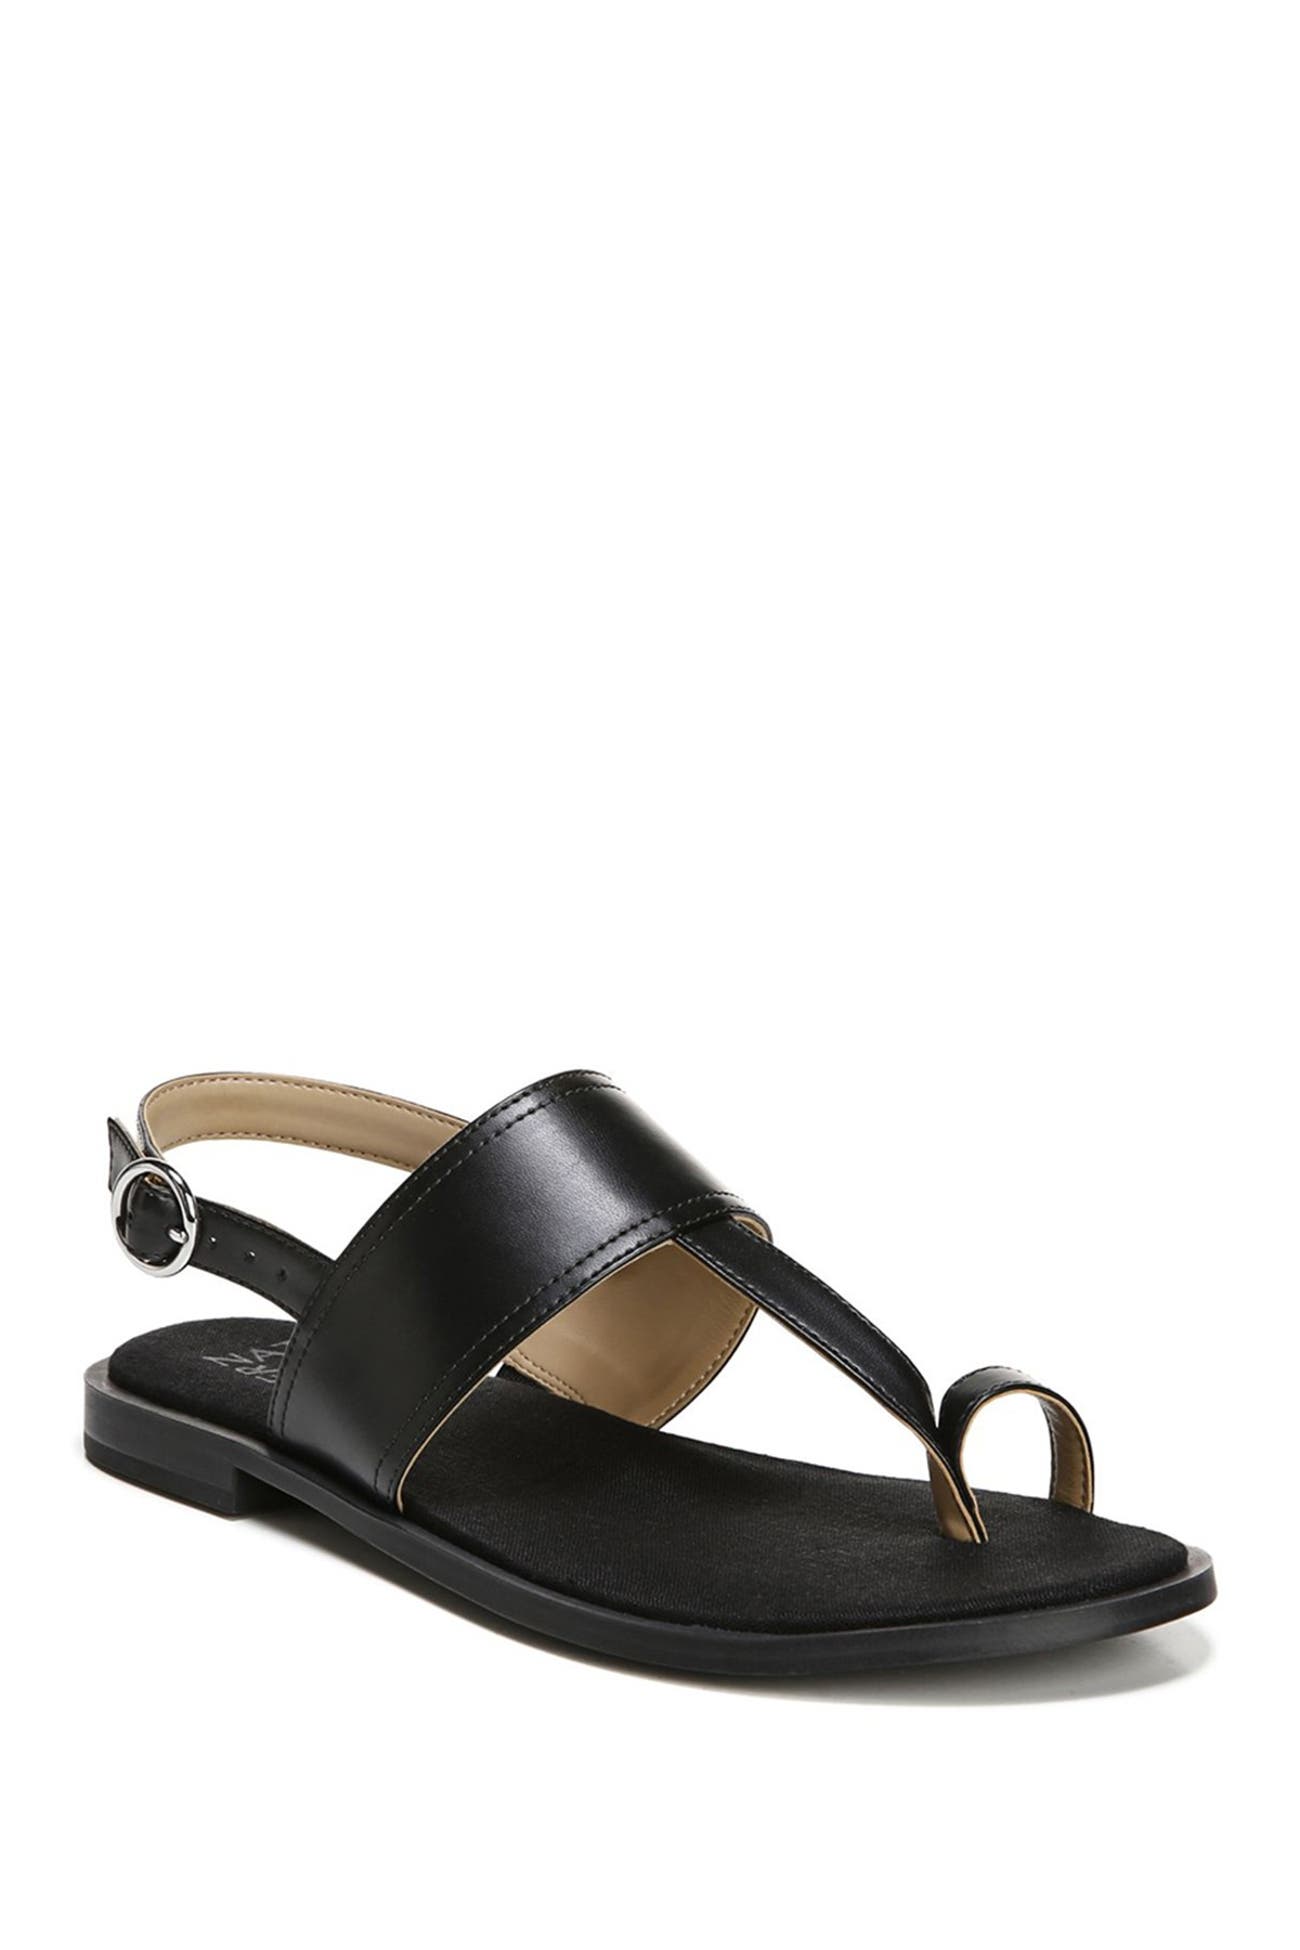 Naturalizer | Linnete Toe Loop Sandal - Wide Width Available ...